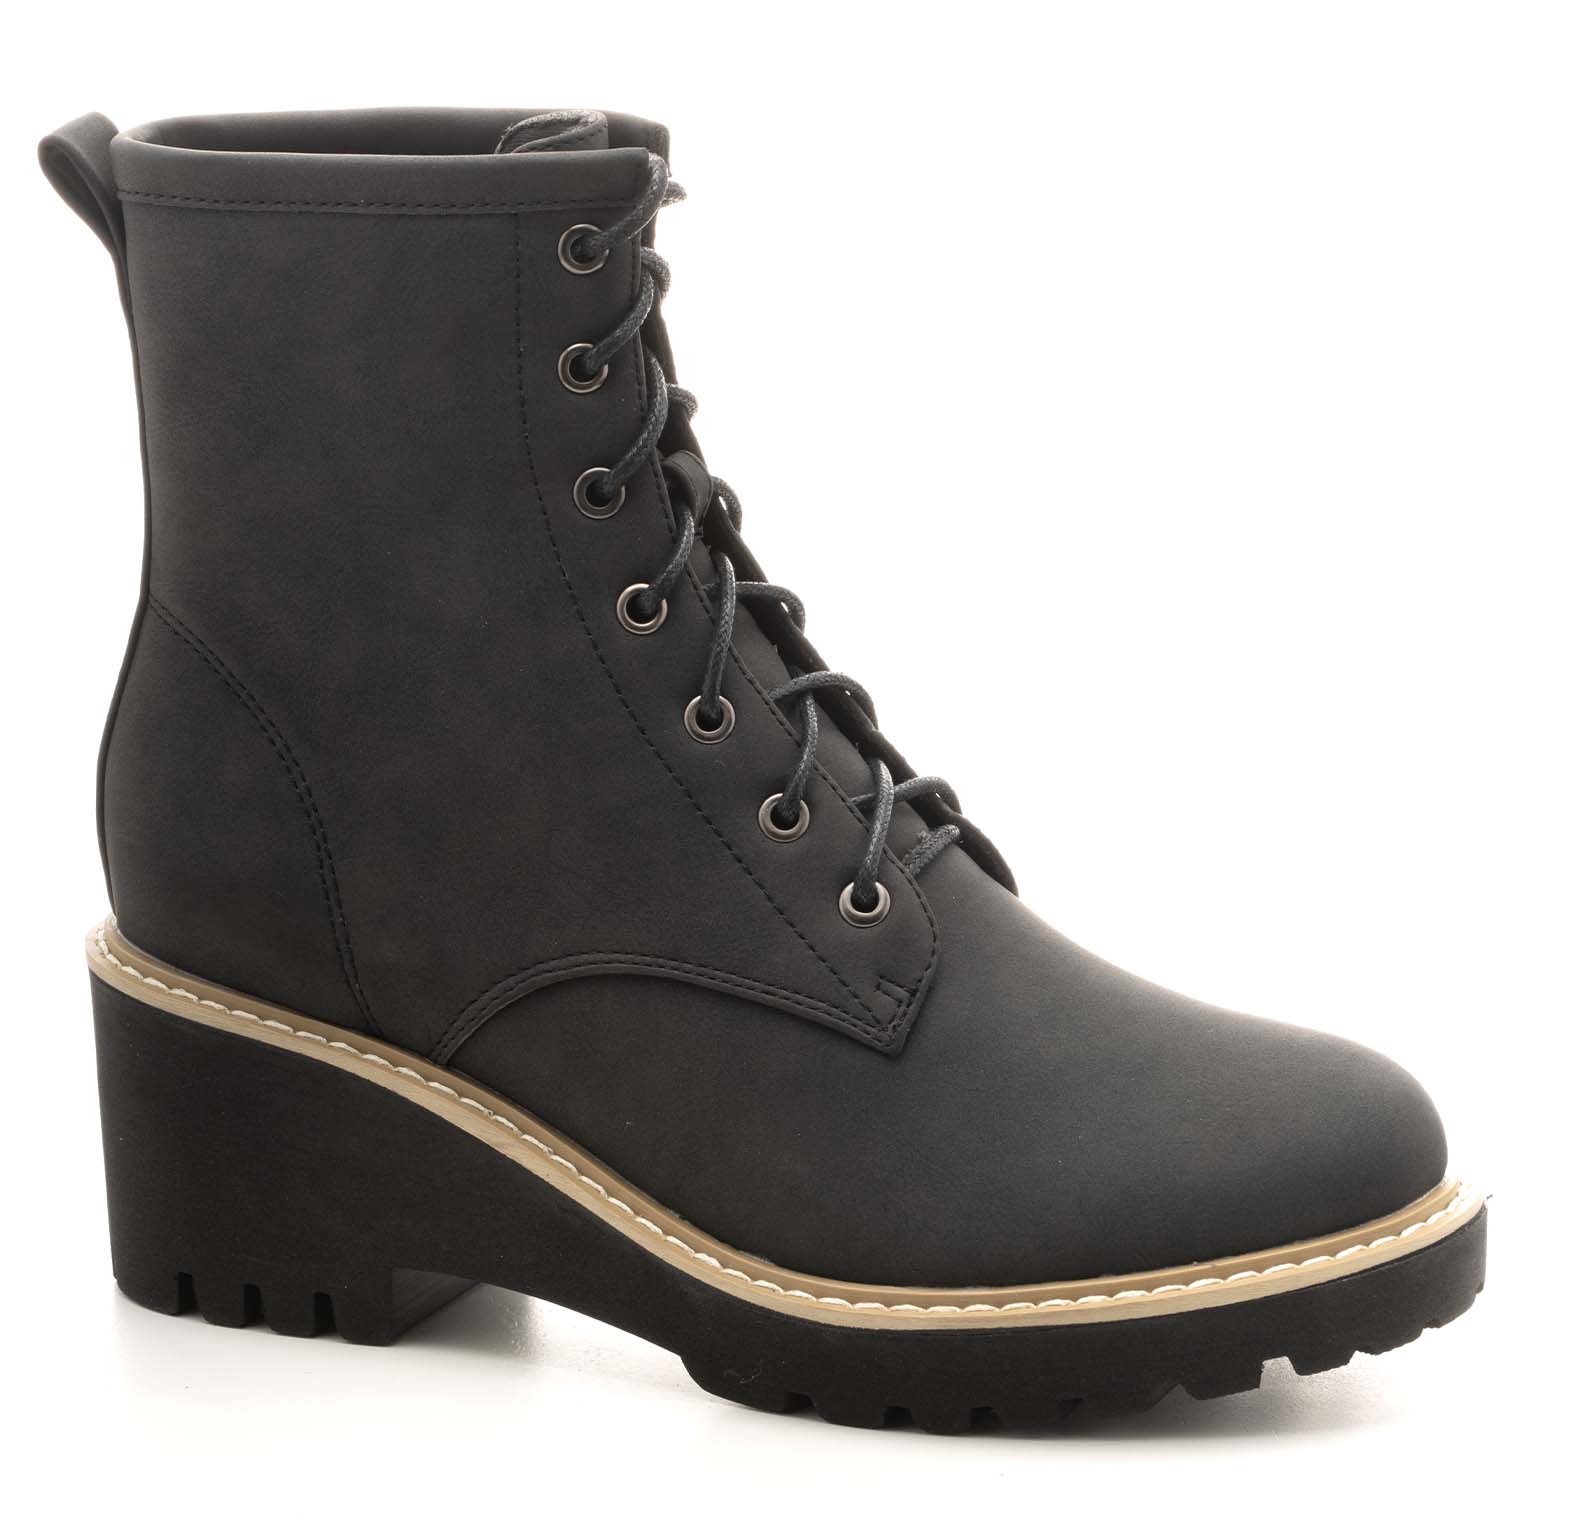 Ghosted Black Boot - Polished Boutique